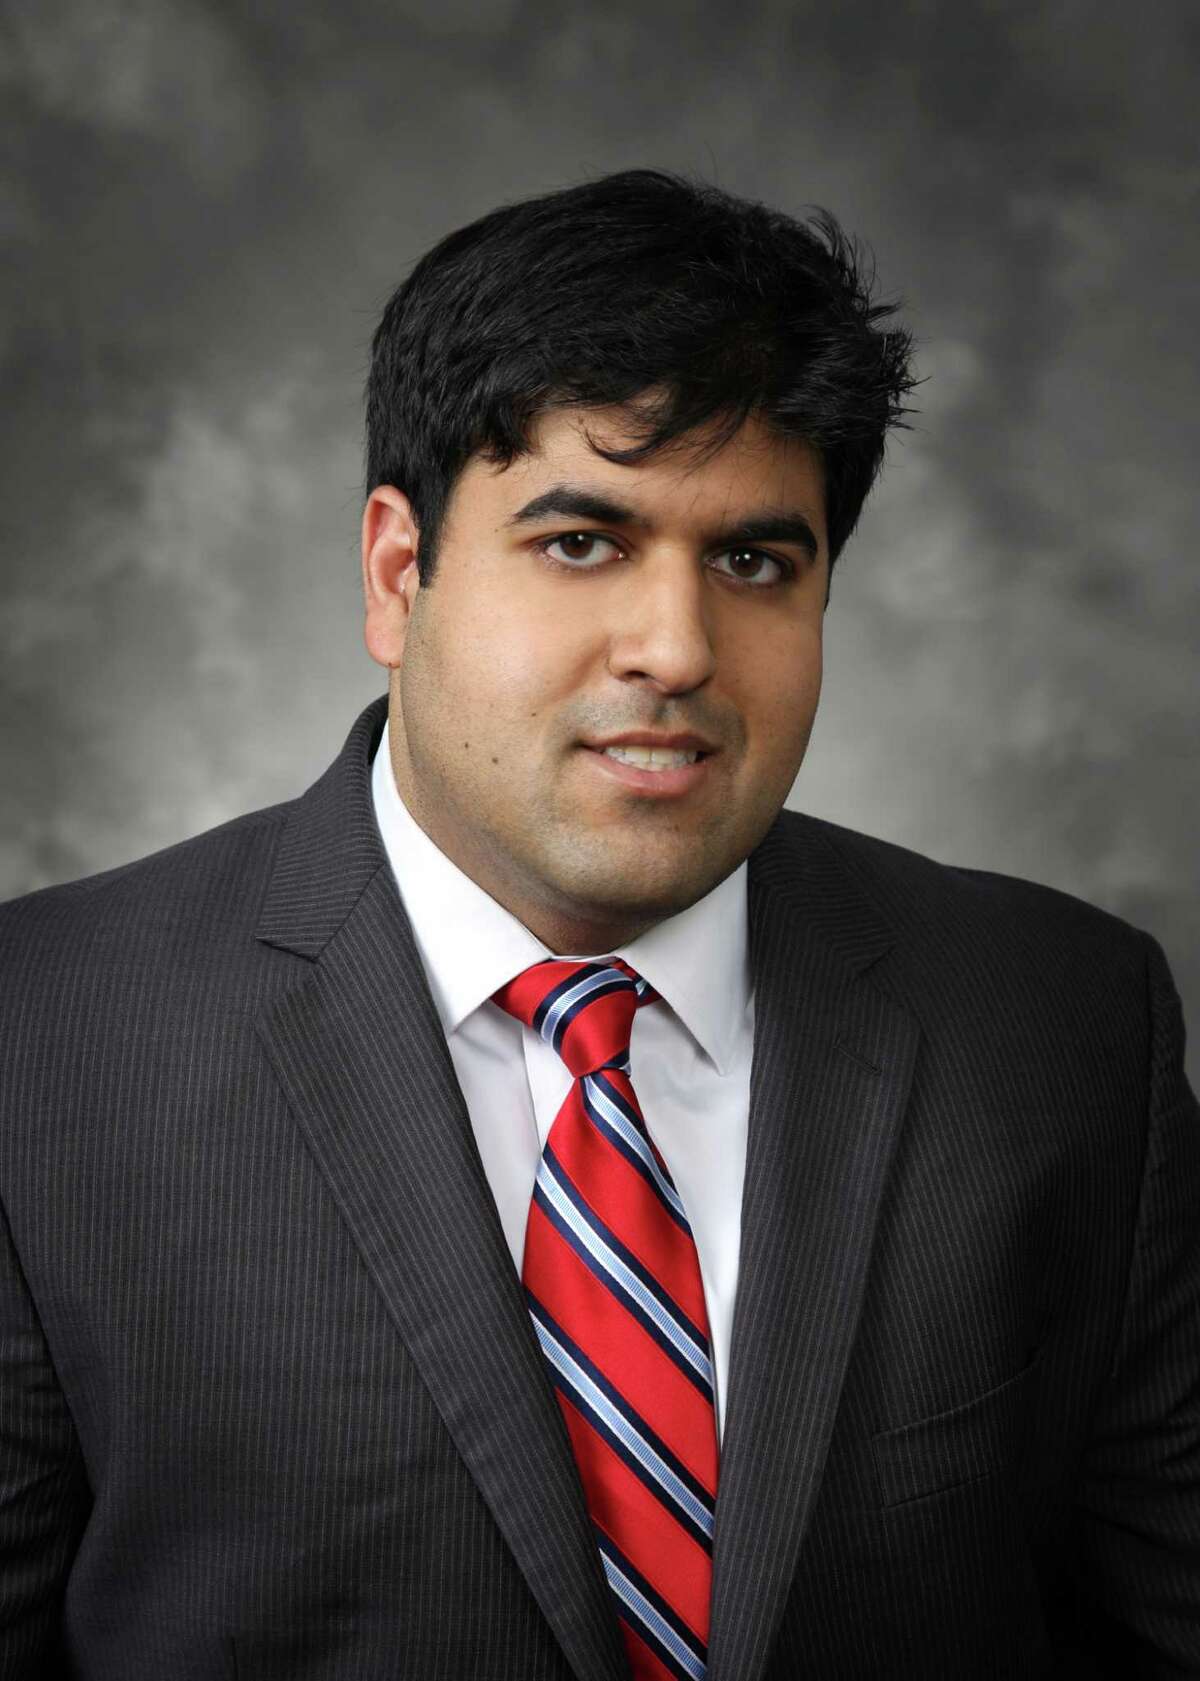 Neel Mitra has joined Tudor, Pickering, Holt & Co. as vice president, utilities and power research. Mitra will be responsible for equity research coverage of the utilities and power sectors.